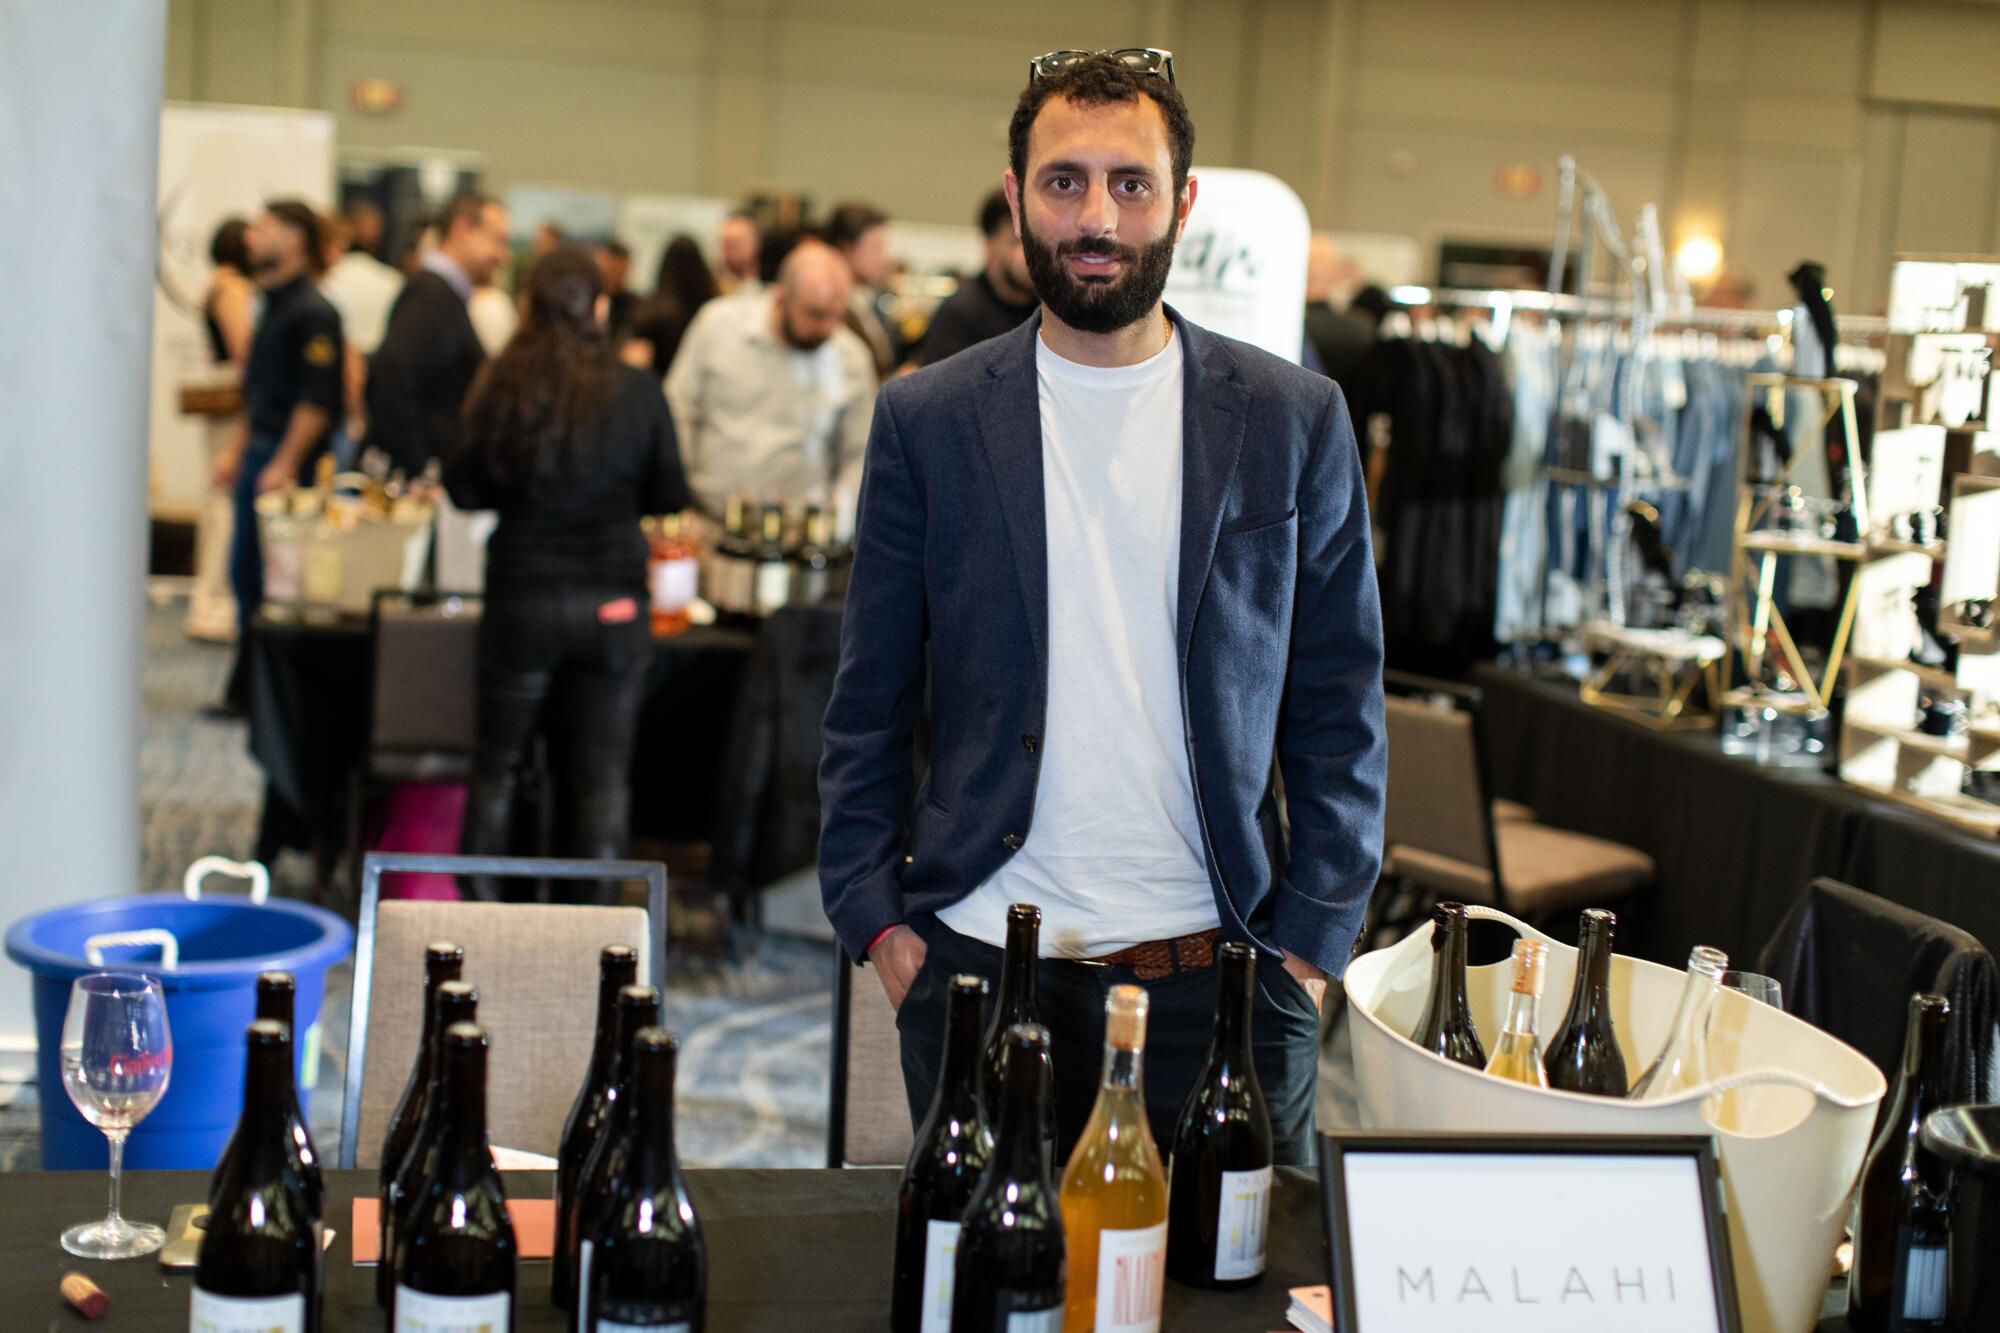 A man stands surrounded by bottles of wine at a wine festival.